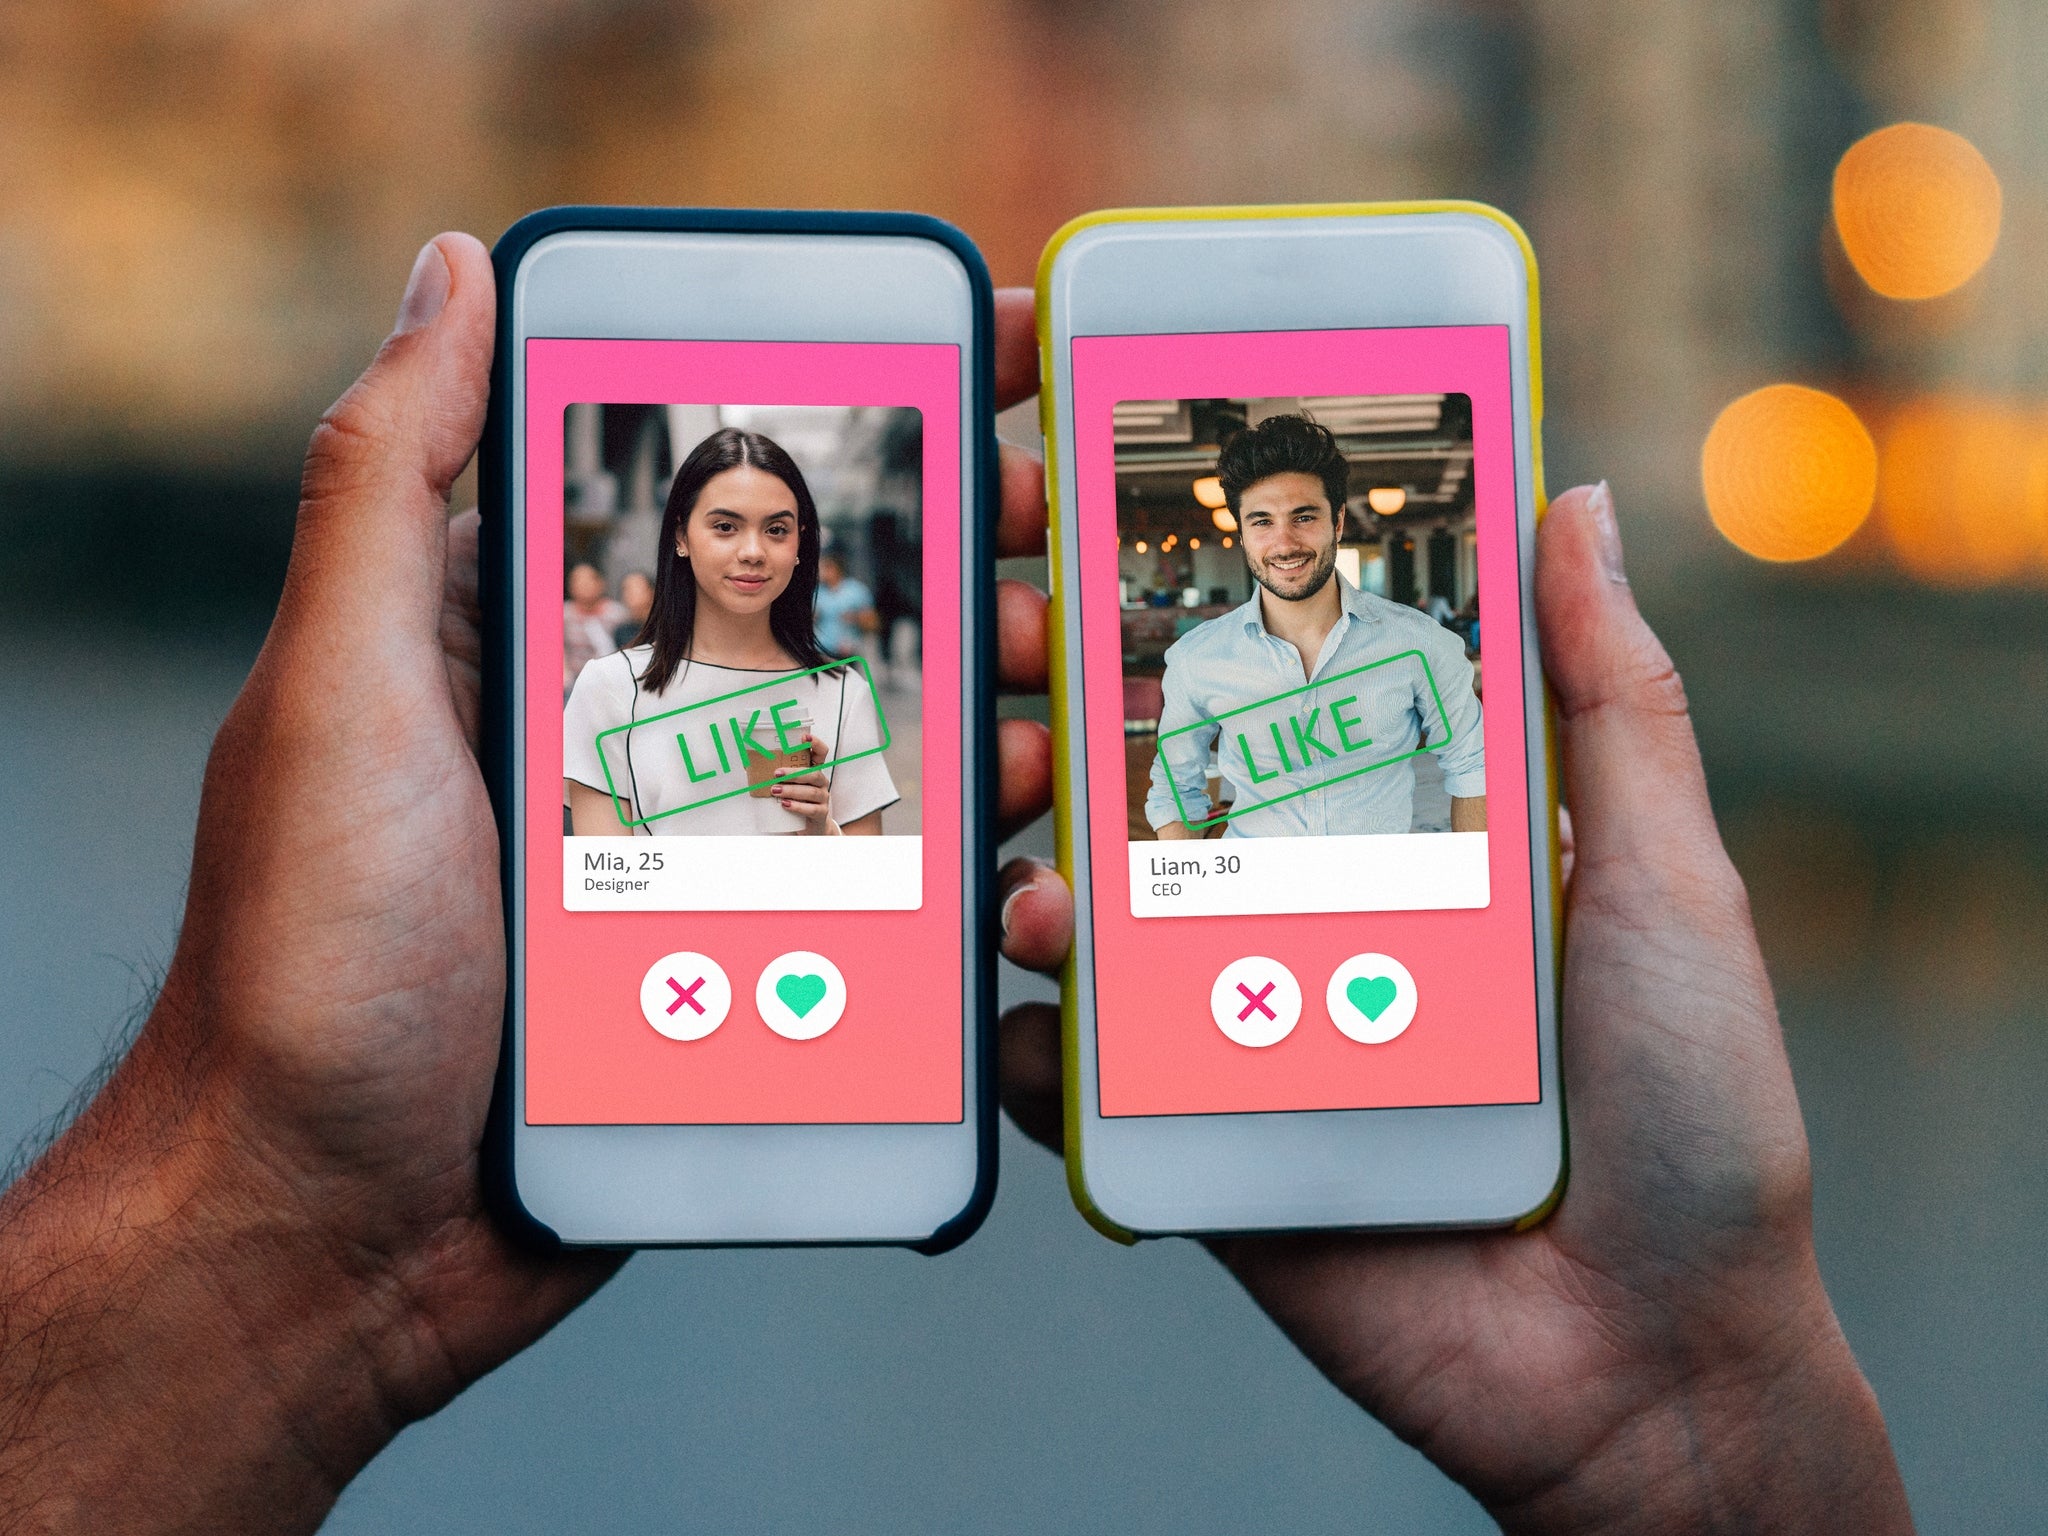 The new blind dating app focusing on connection